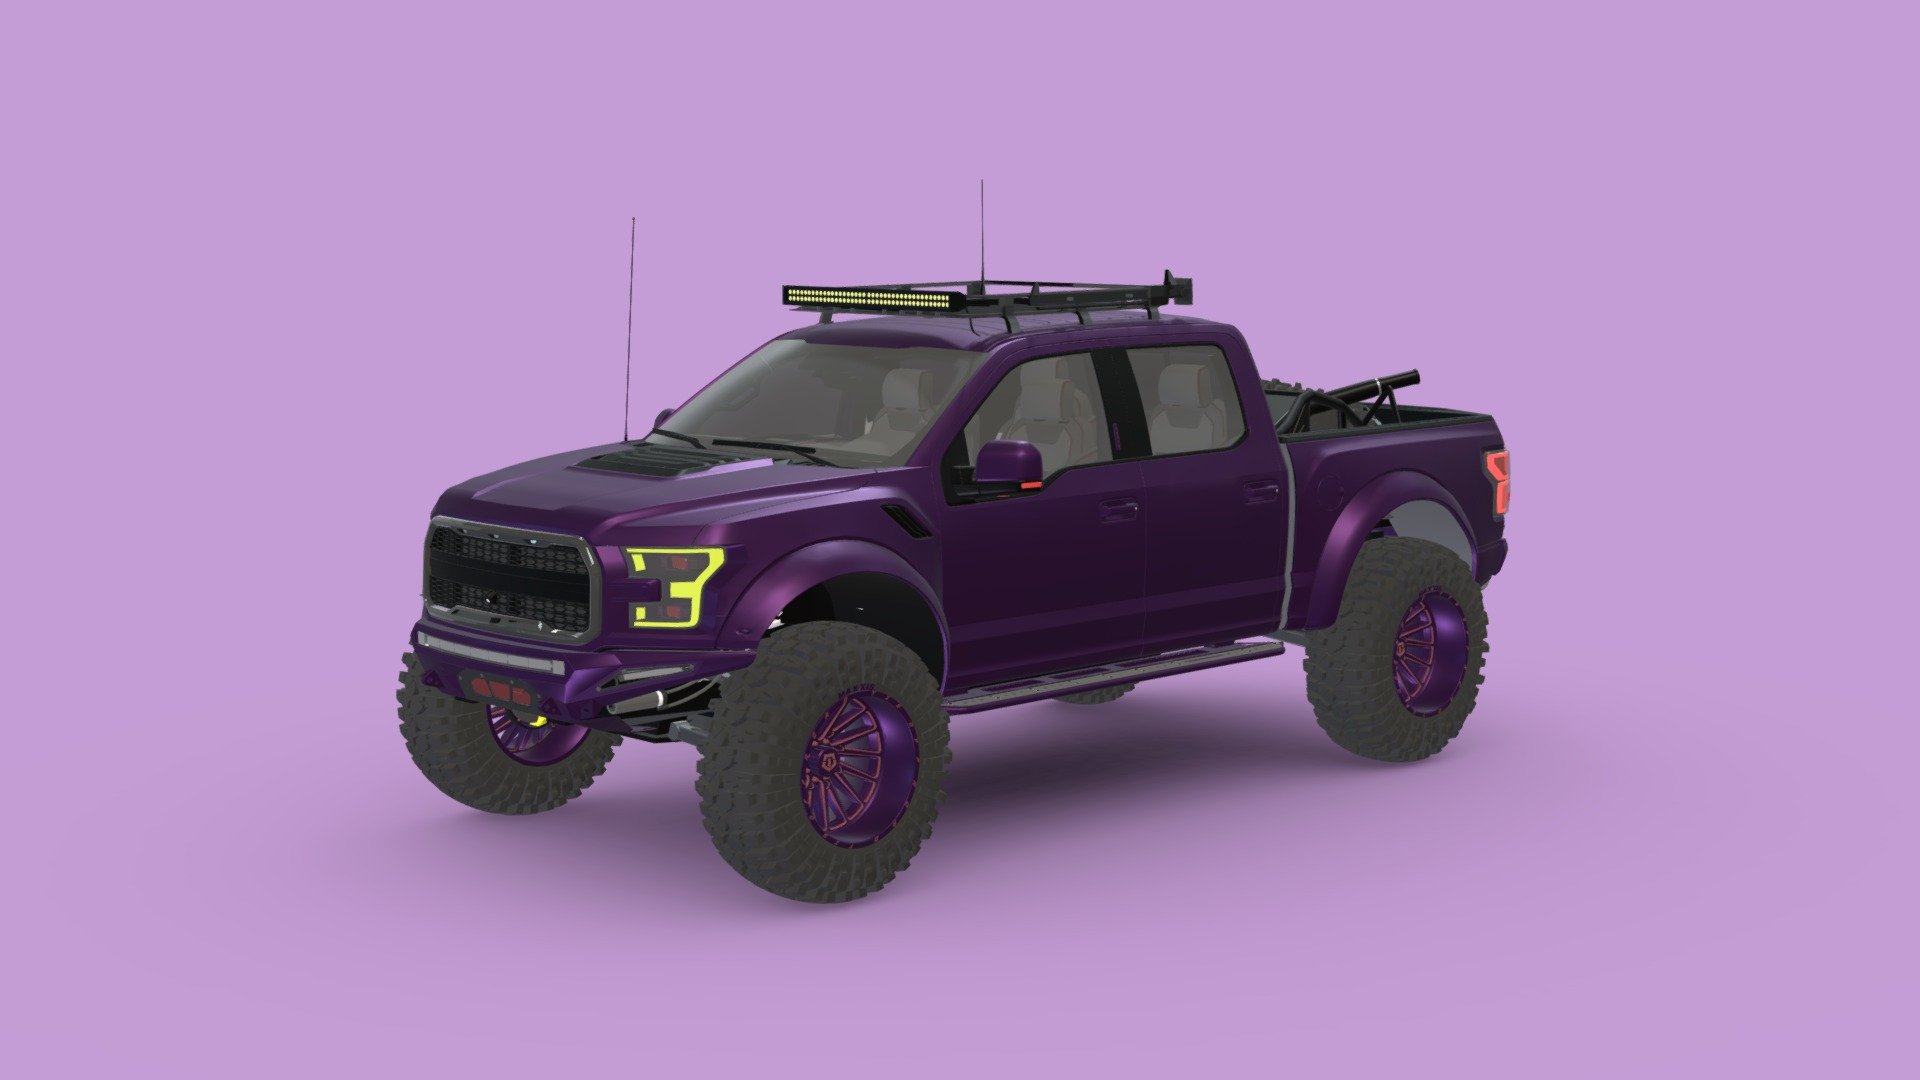 Ford Raptor F150 transformed into monster truck kindoff offroad truck with a rugged look - Ford Raptor F150 Offroad Truck - 3D model by jonbruno 3d model